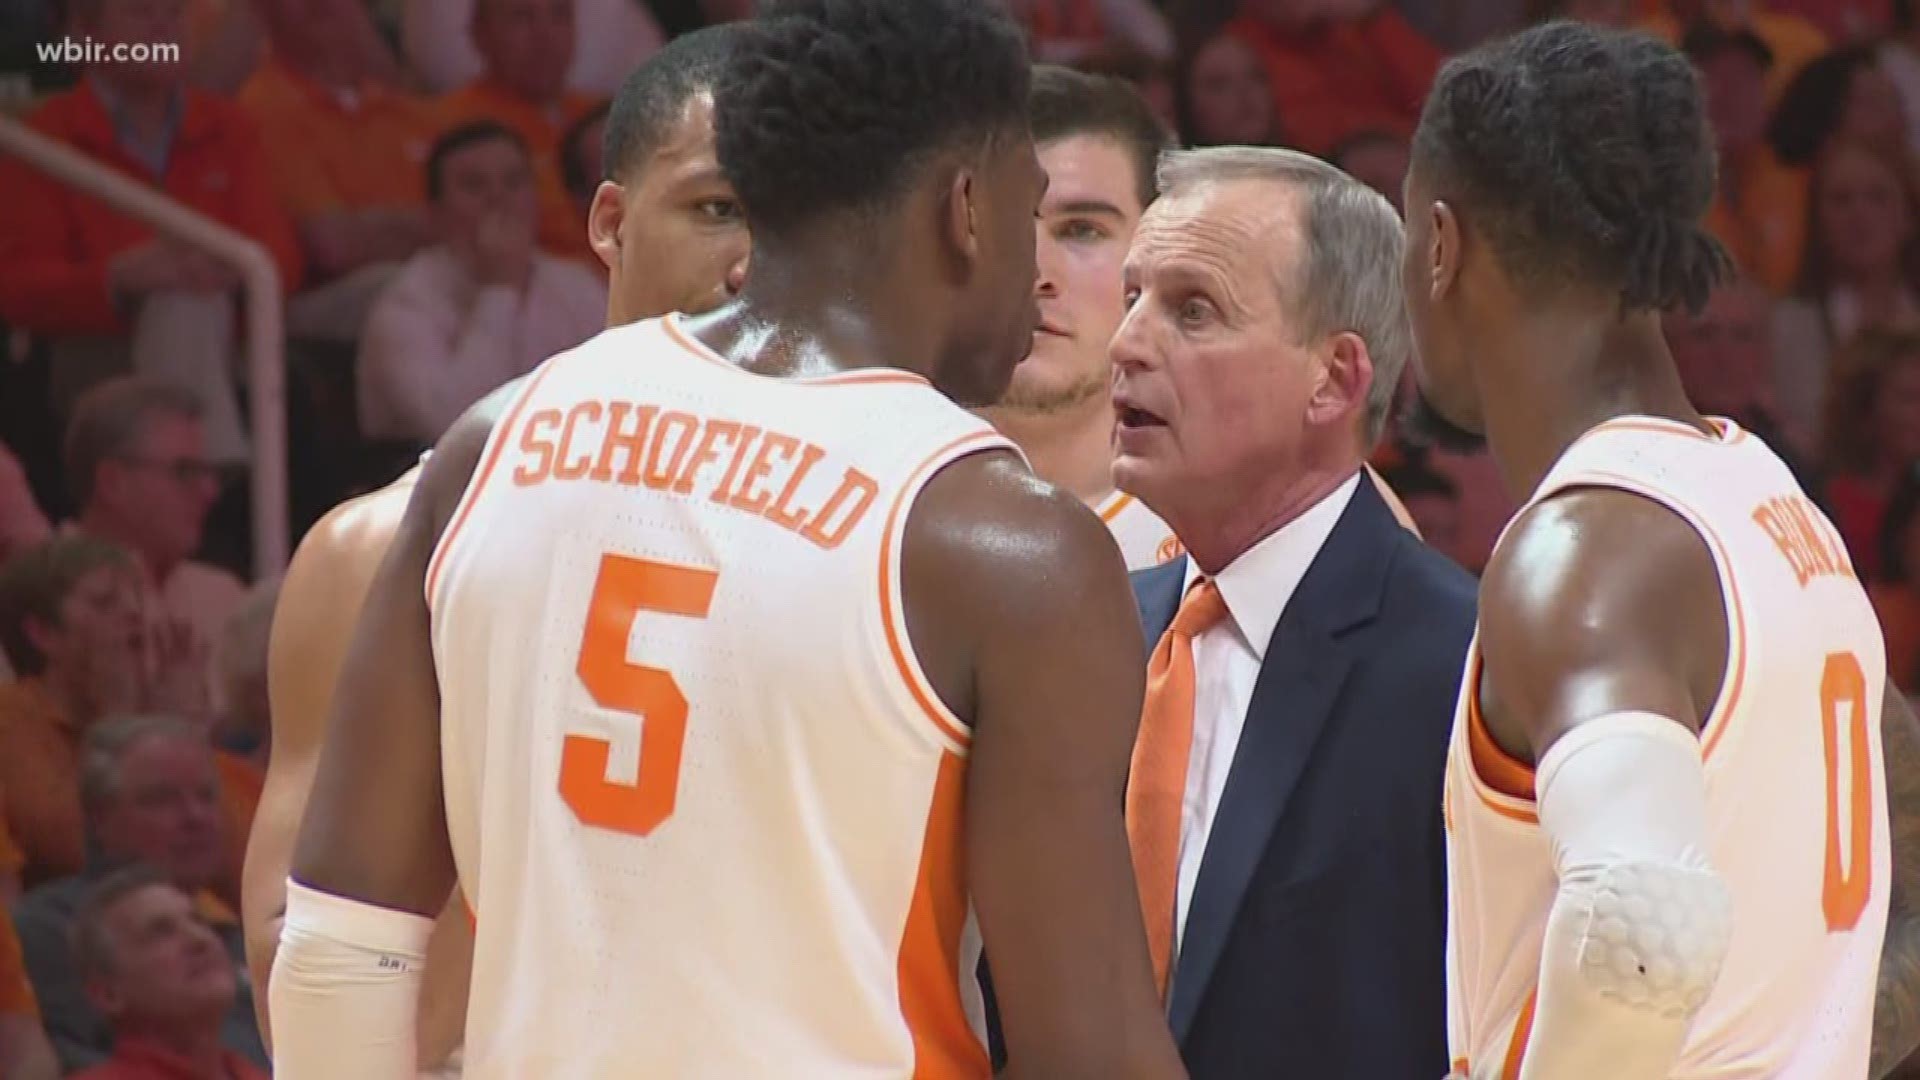 Men's basketball head Coach Rick Barnes is staying at the University of Tennessee!